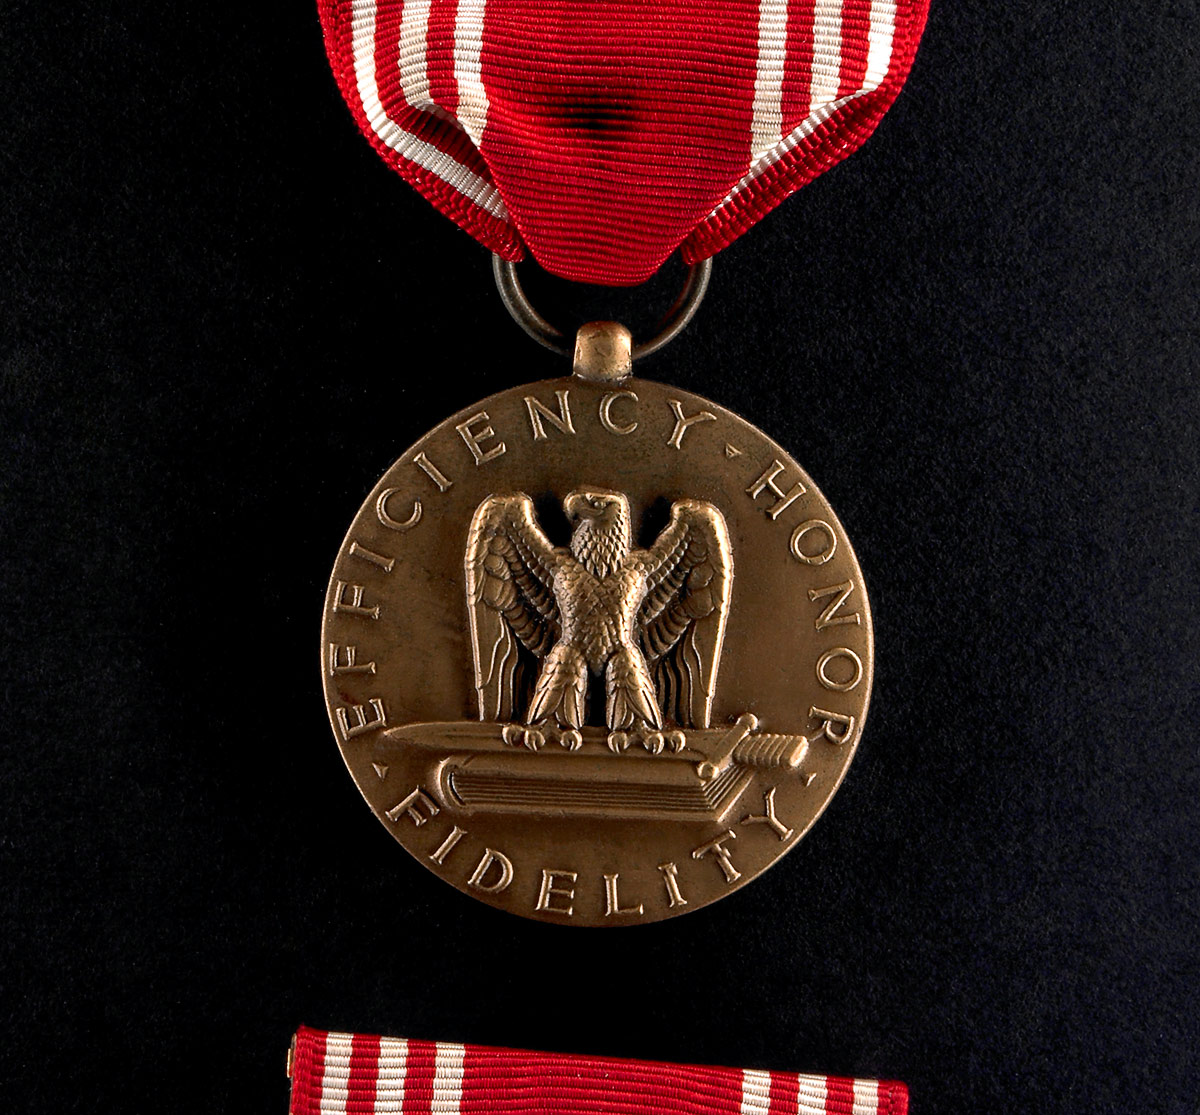 good conduct medal ©2015 by bret wills